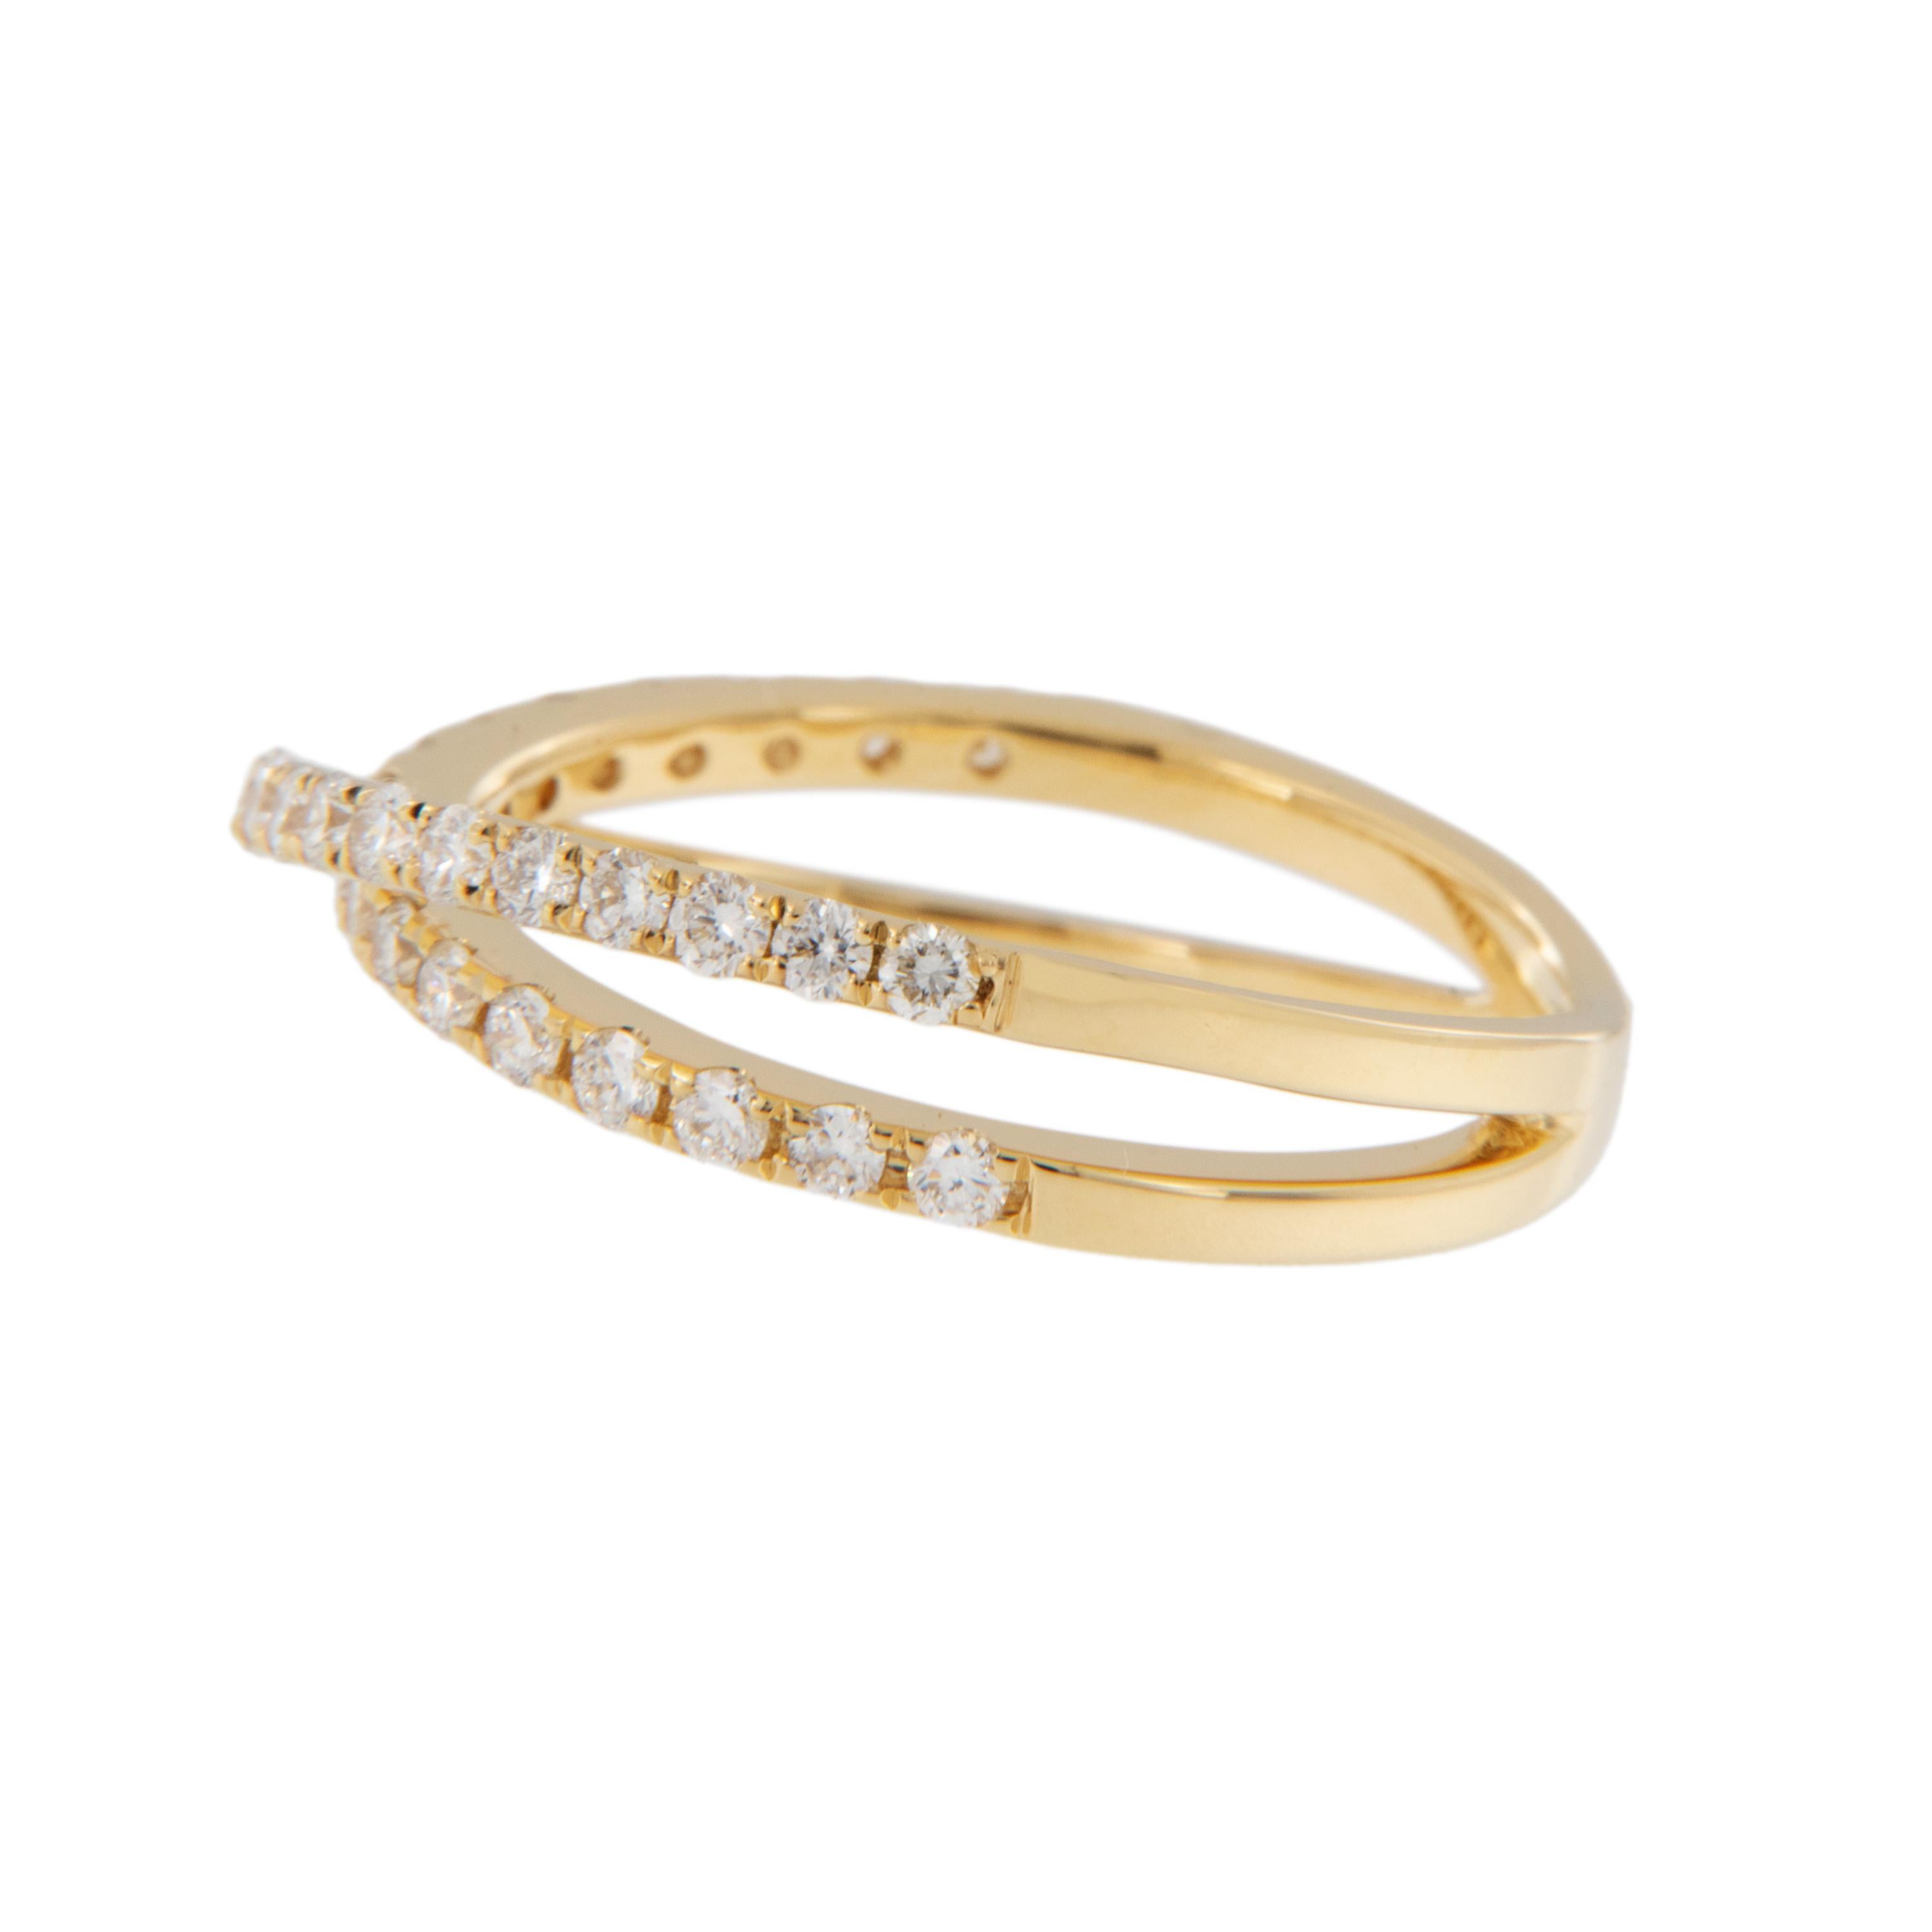 Ladies - it's time to raise your right hands! This perfect right hand crossover ring is made of 18 karat yellow gold in the iconic 